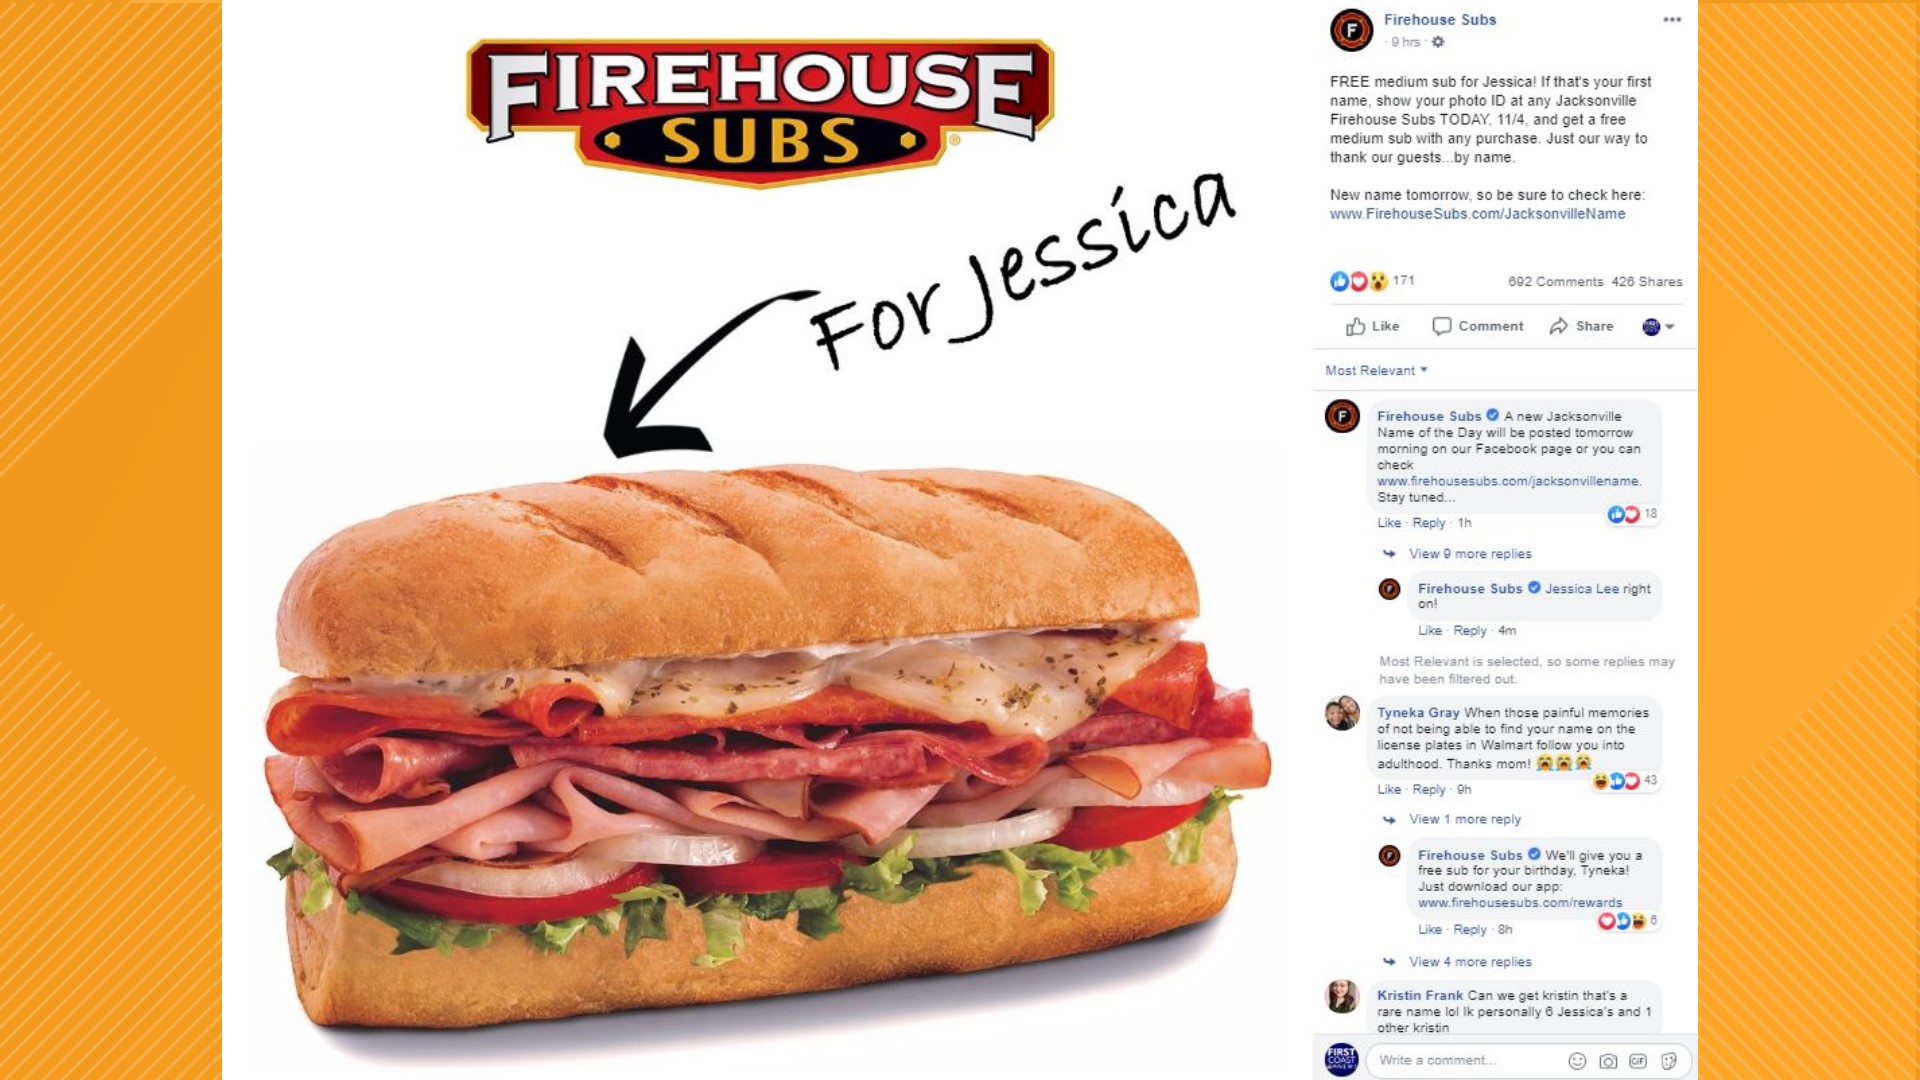 Score a FREE Firehouse Sub if your name is the "Name of the Day